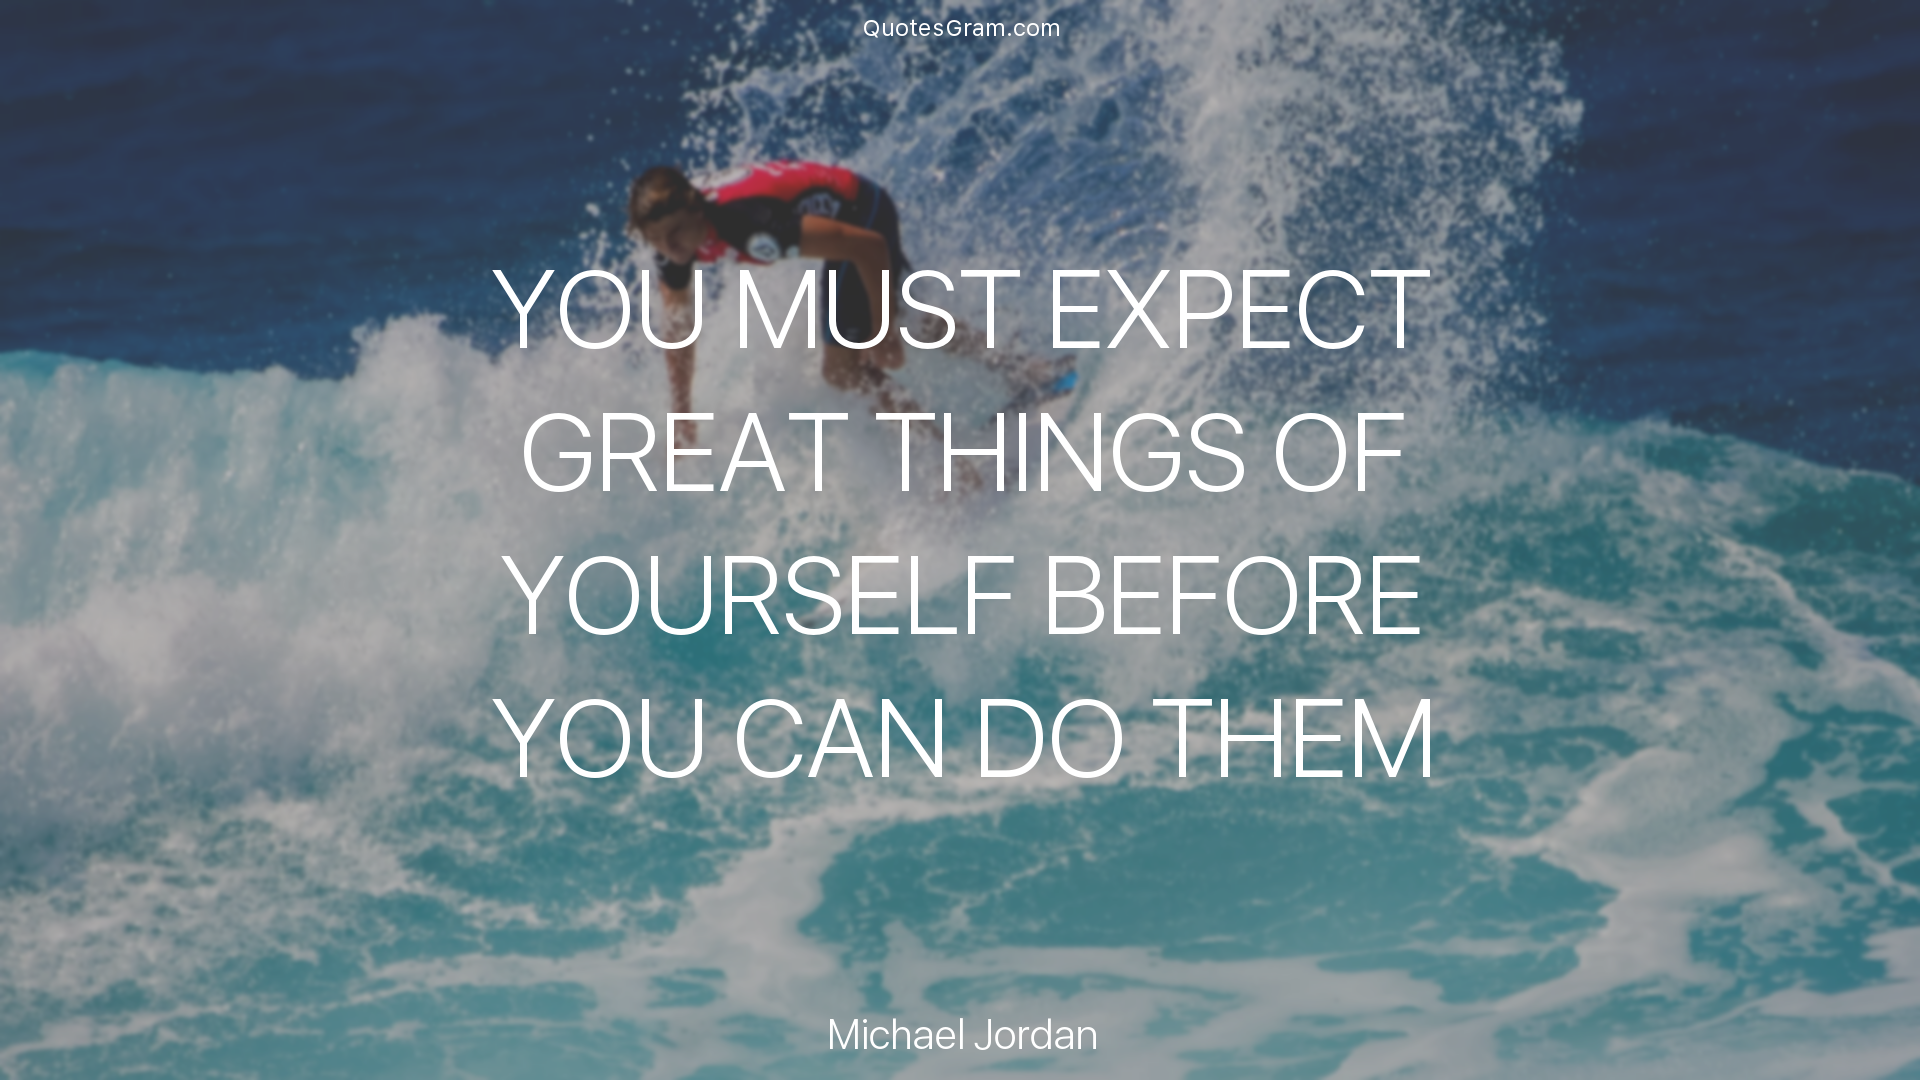 michael-jordan-quote-you-must-expect-great-things-of-yourself-before-you.png